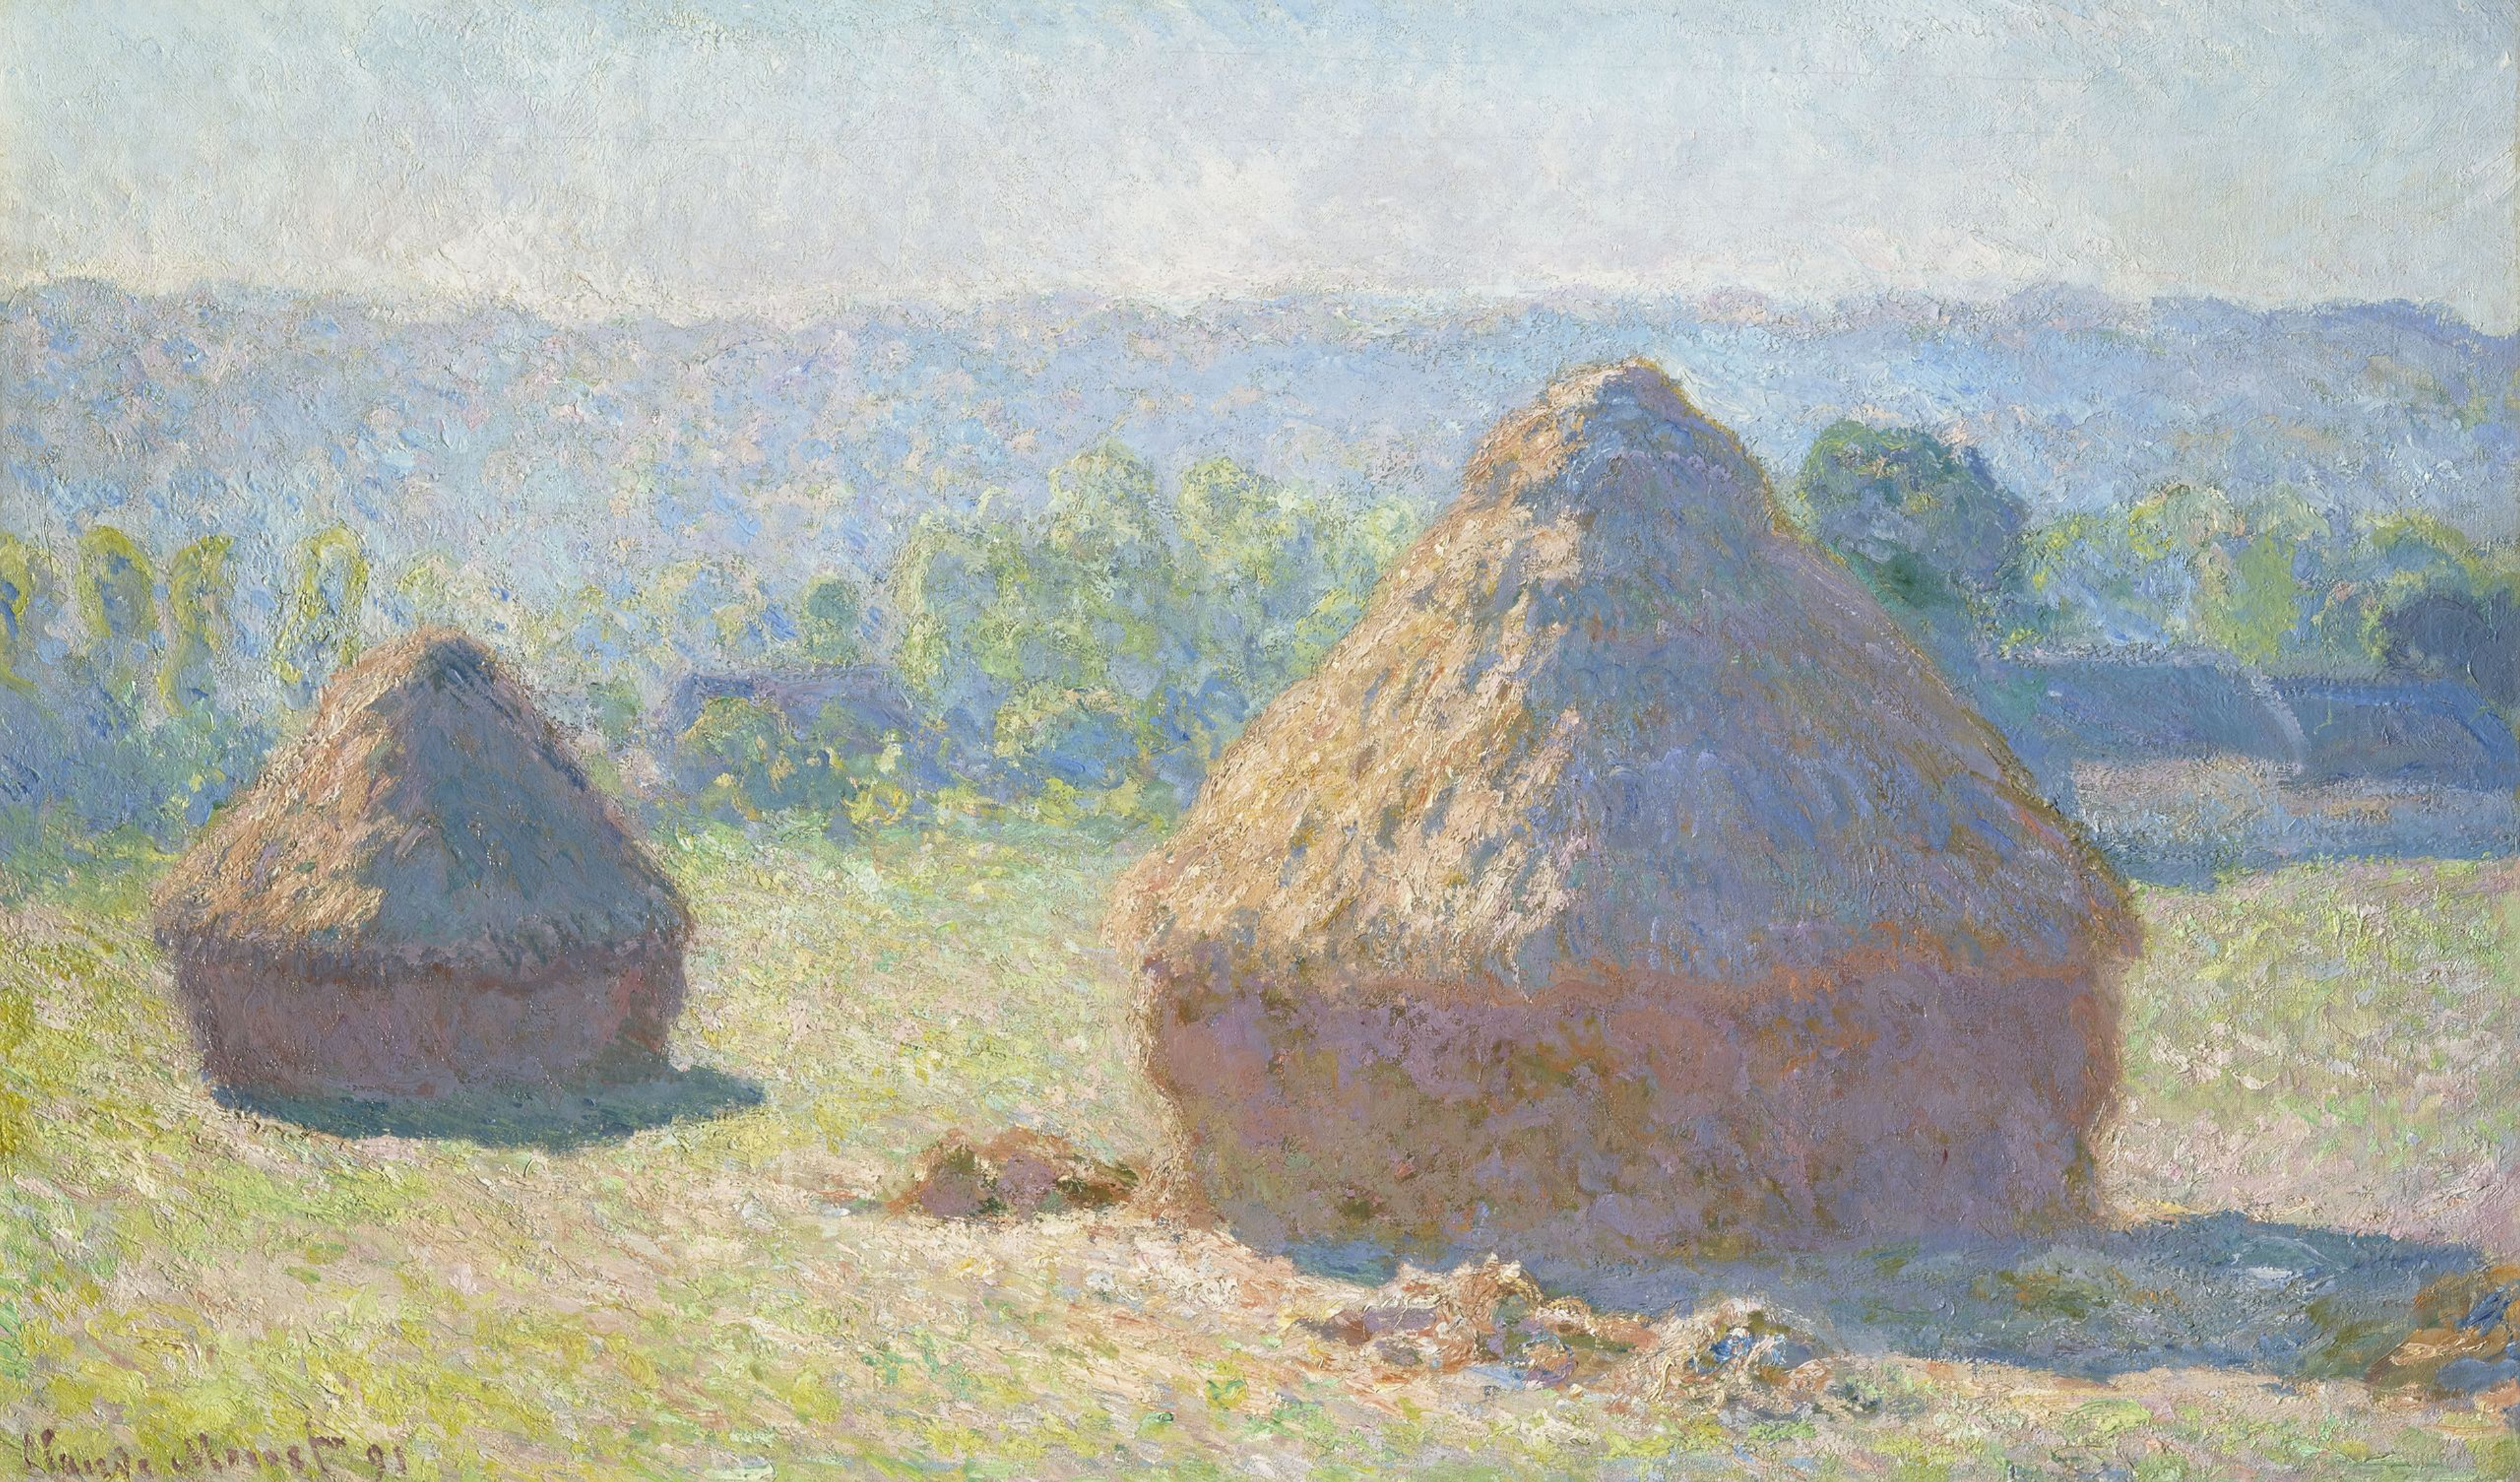 This image shows two large hay stacks on a grassy field, bathed in golden sunlight.